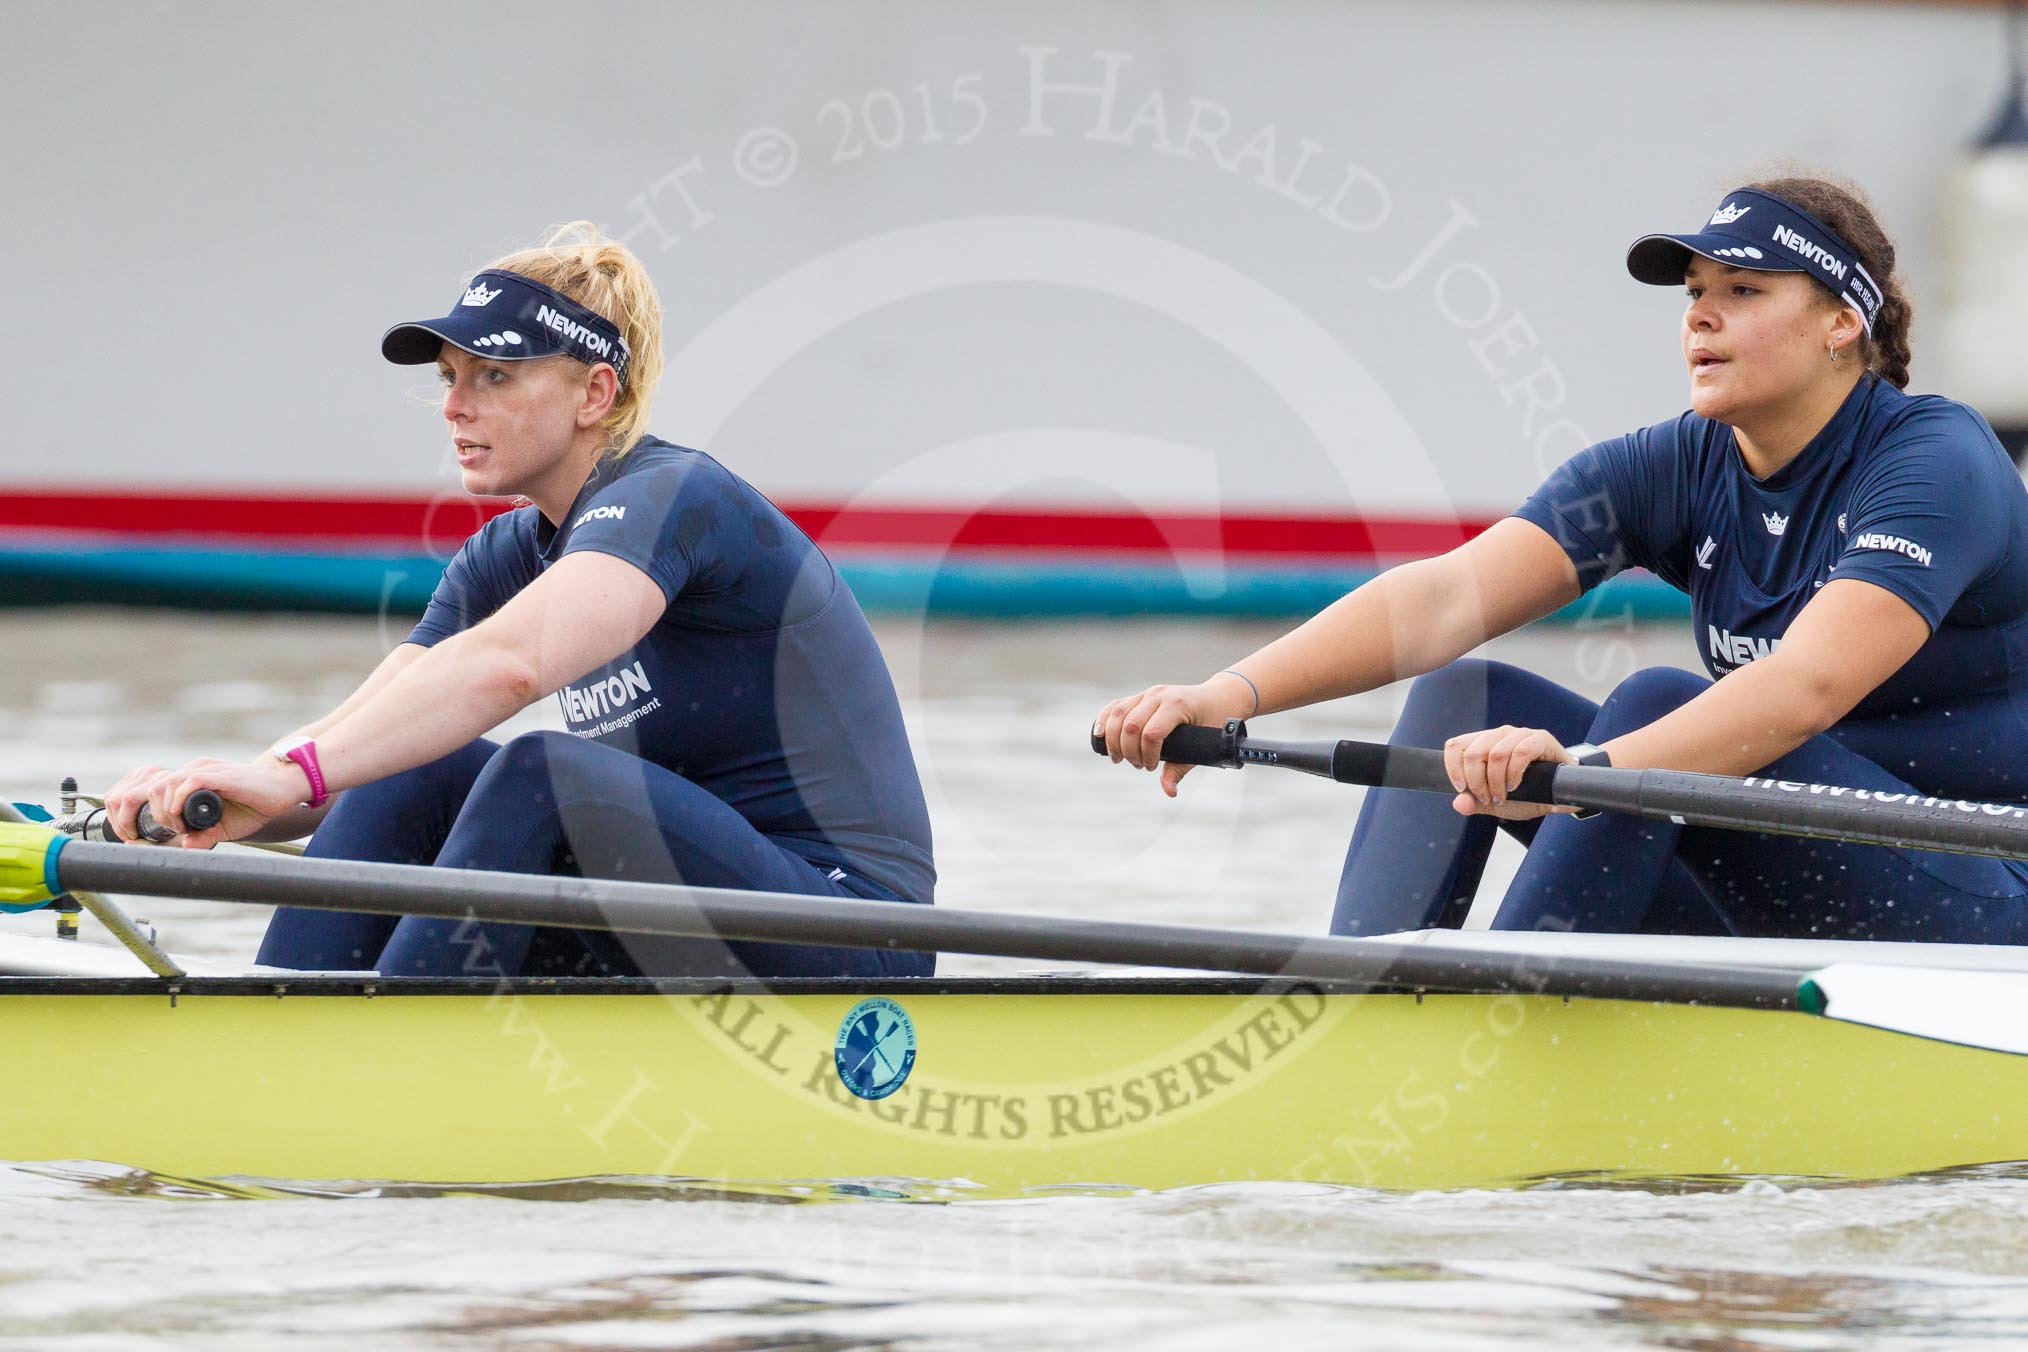 The Boat Race season 2016 - Women's Boat Race Trial Eights (OUWBC, Oxford): "Charybdis", here 4-Emma Spruce, 3-Lara Pysden.
River Thames between Putney Bridge and Mortlake,
London SW15,

United Kingdom,
on 10 December 2015 at 12:18, image #147